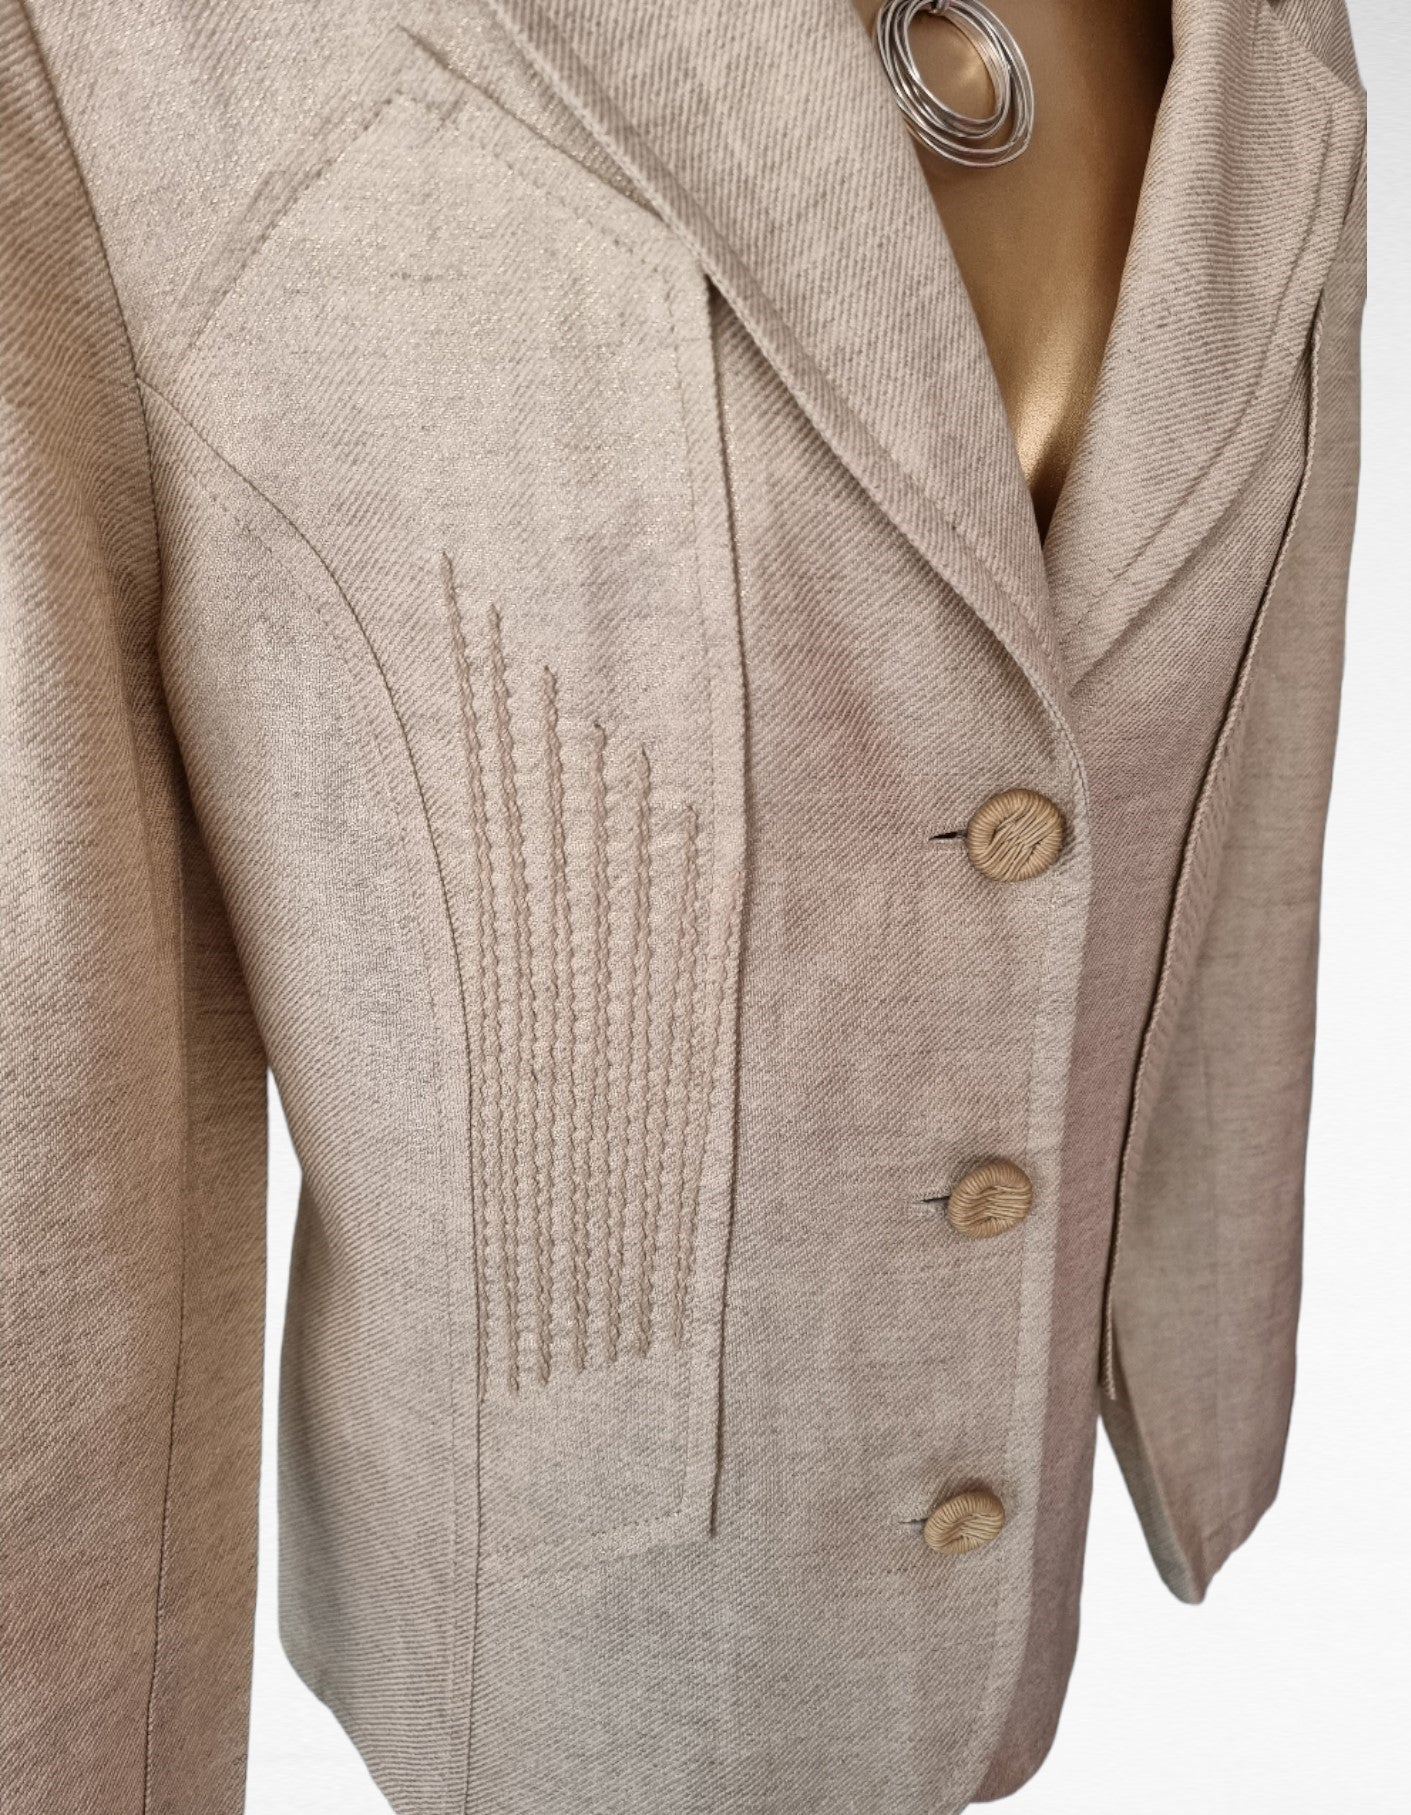 Tuzzi Designer Champaign/Cream Embroidered Front Fitted Jacket UK18 US14 EU46 Timeless Fashions